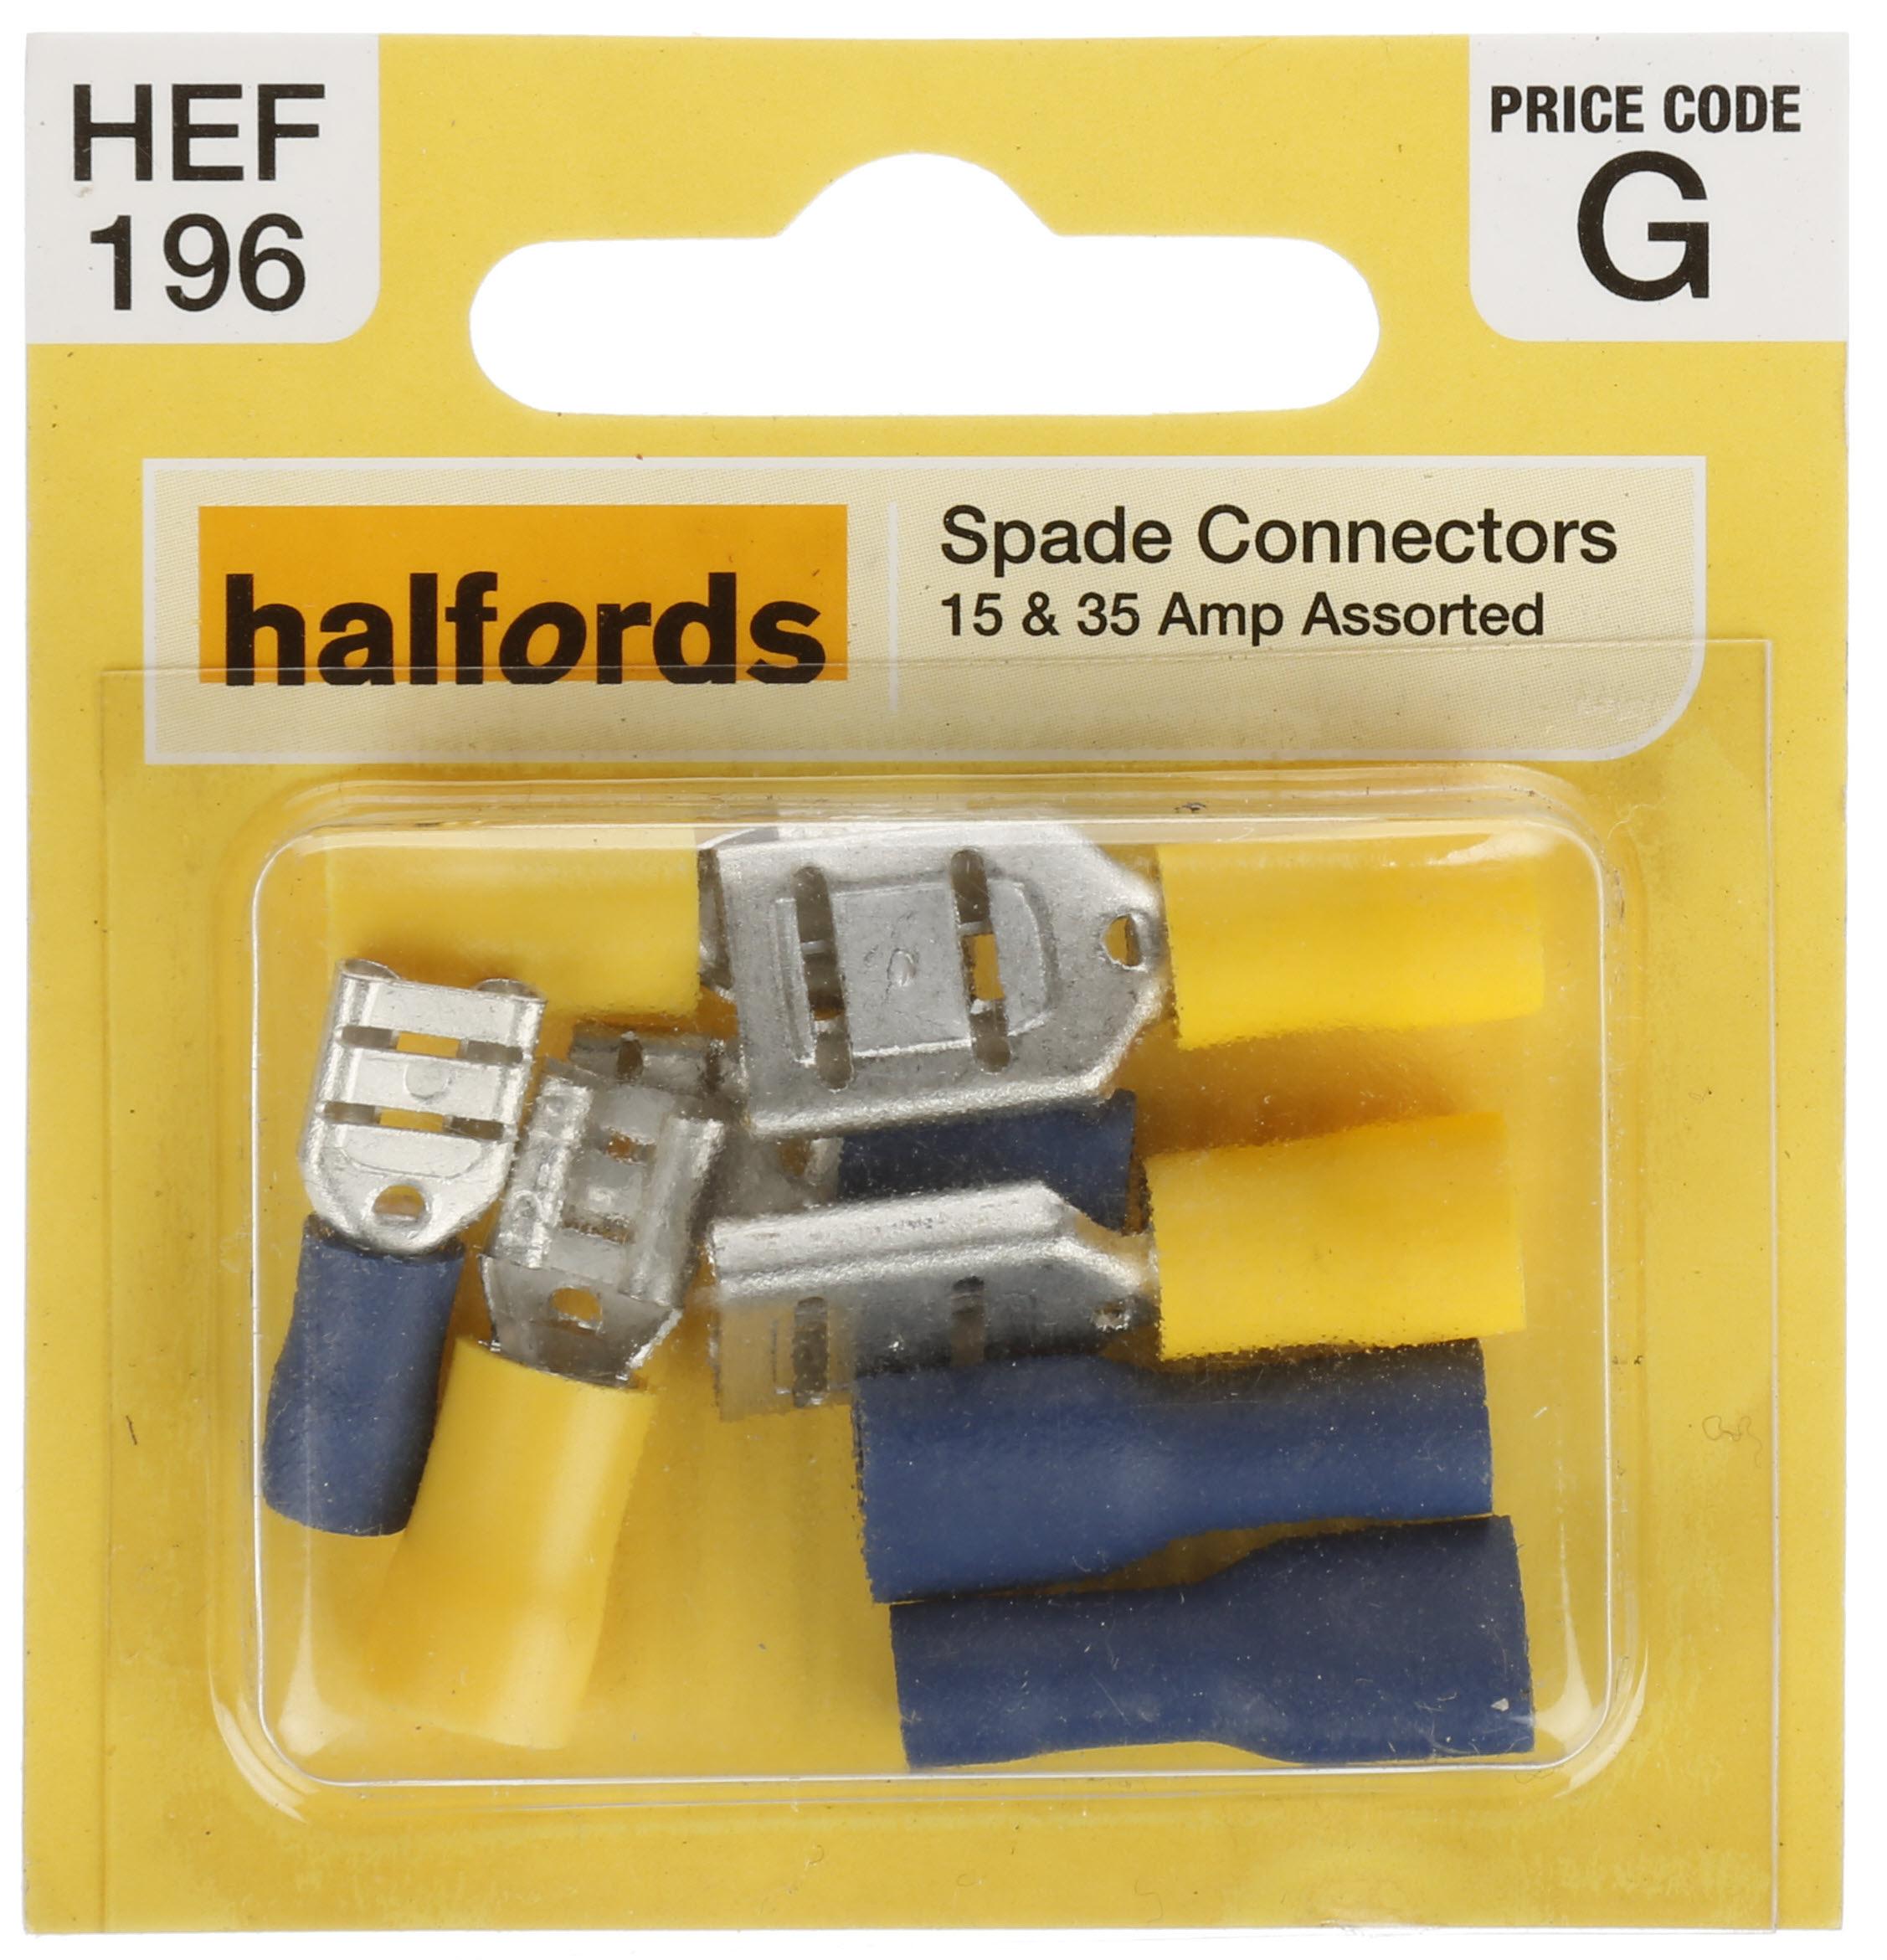 Halfords Assorted Male & Female Spade Connectors 15 & 35 Amp (Hef196)